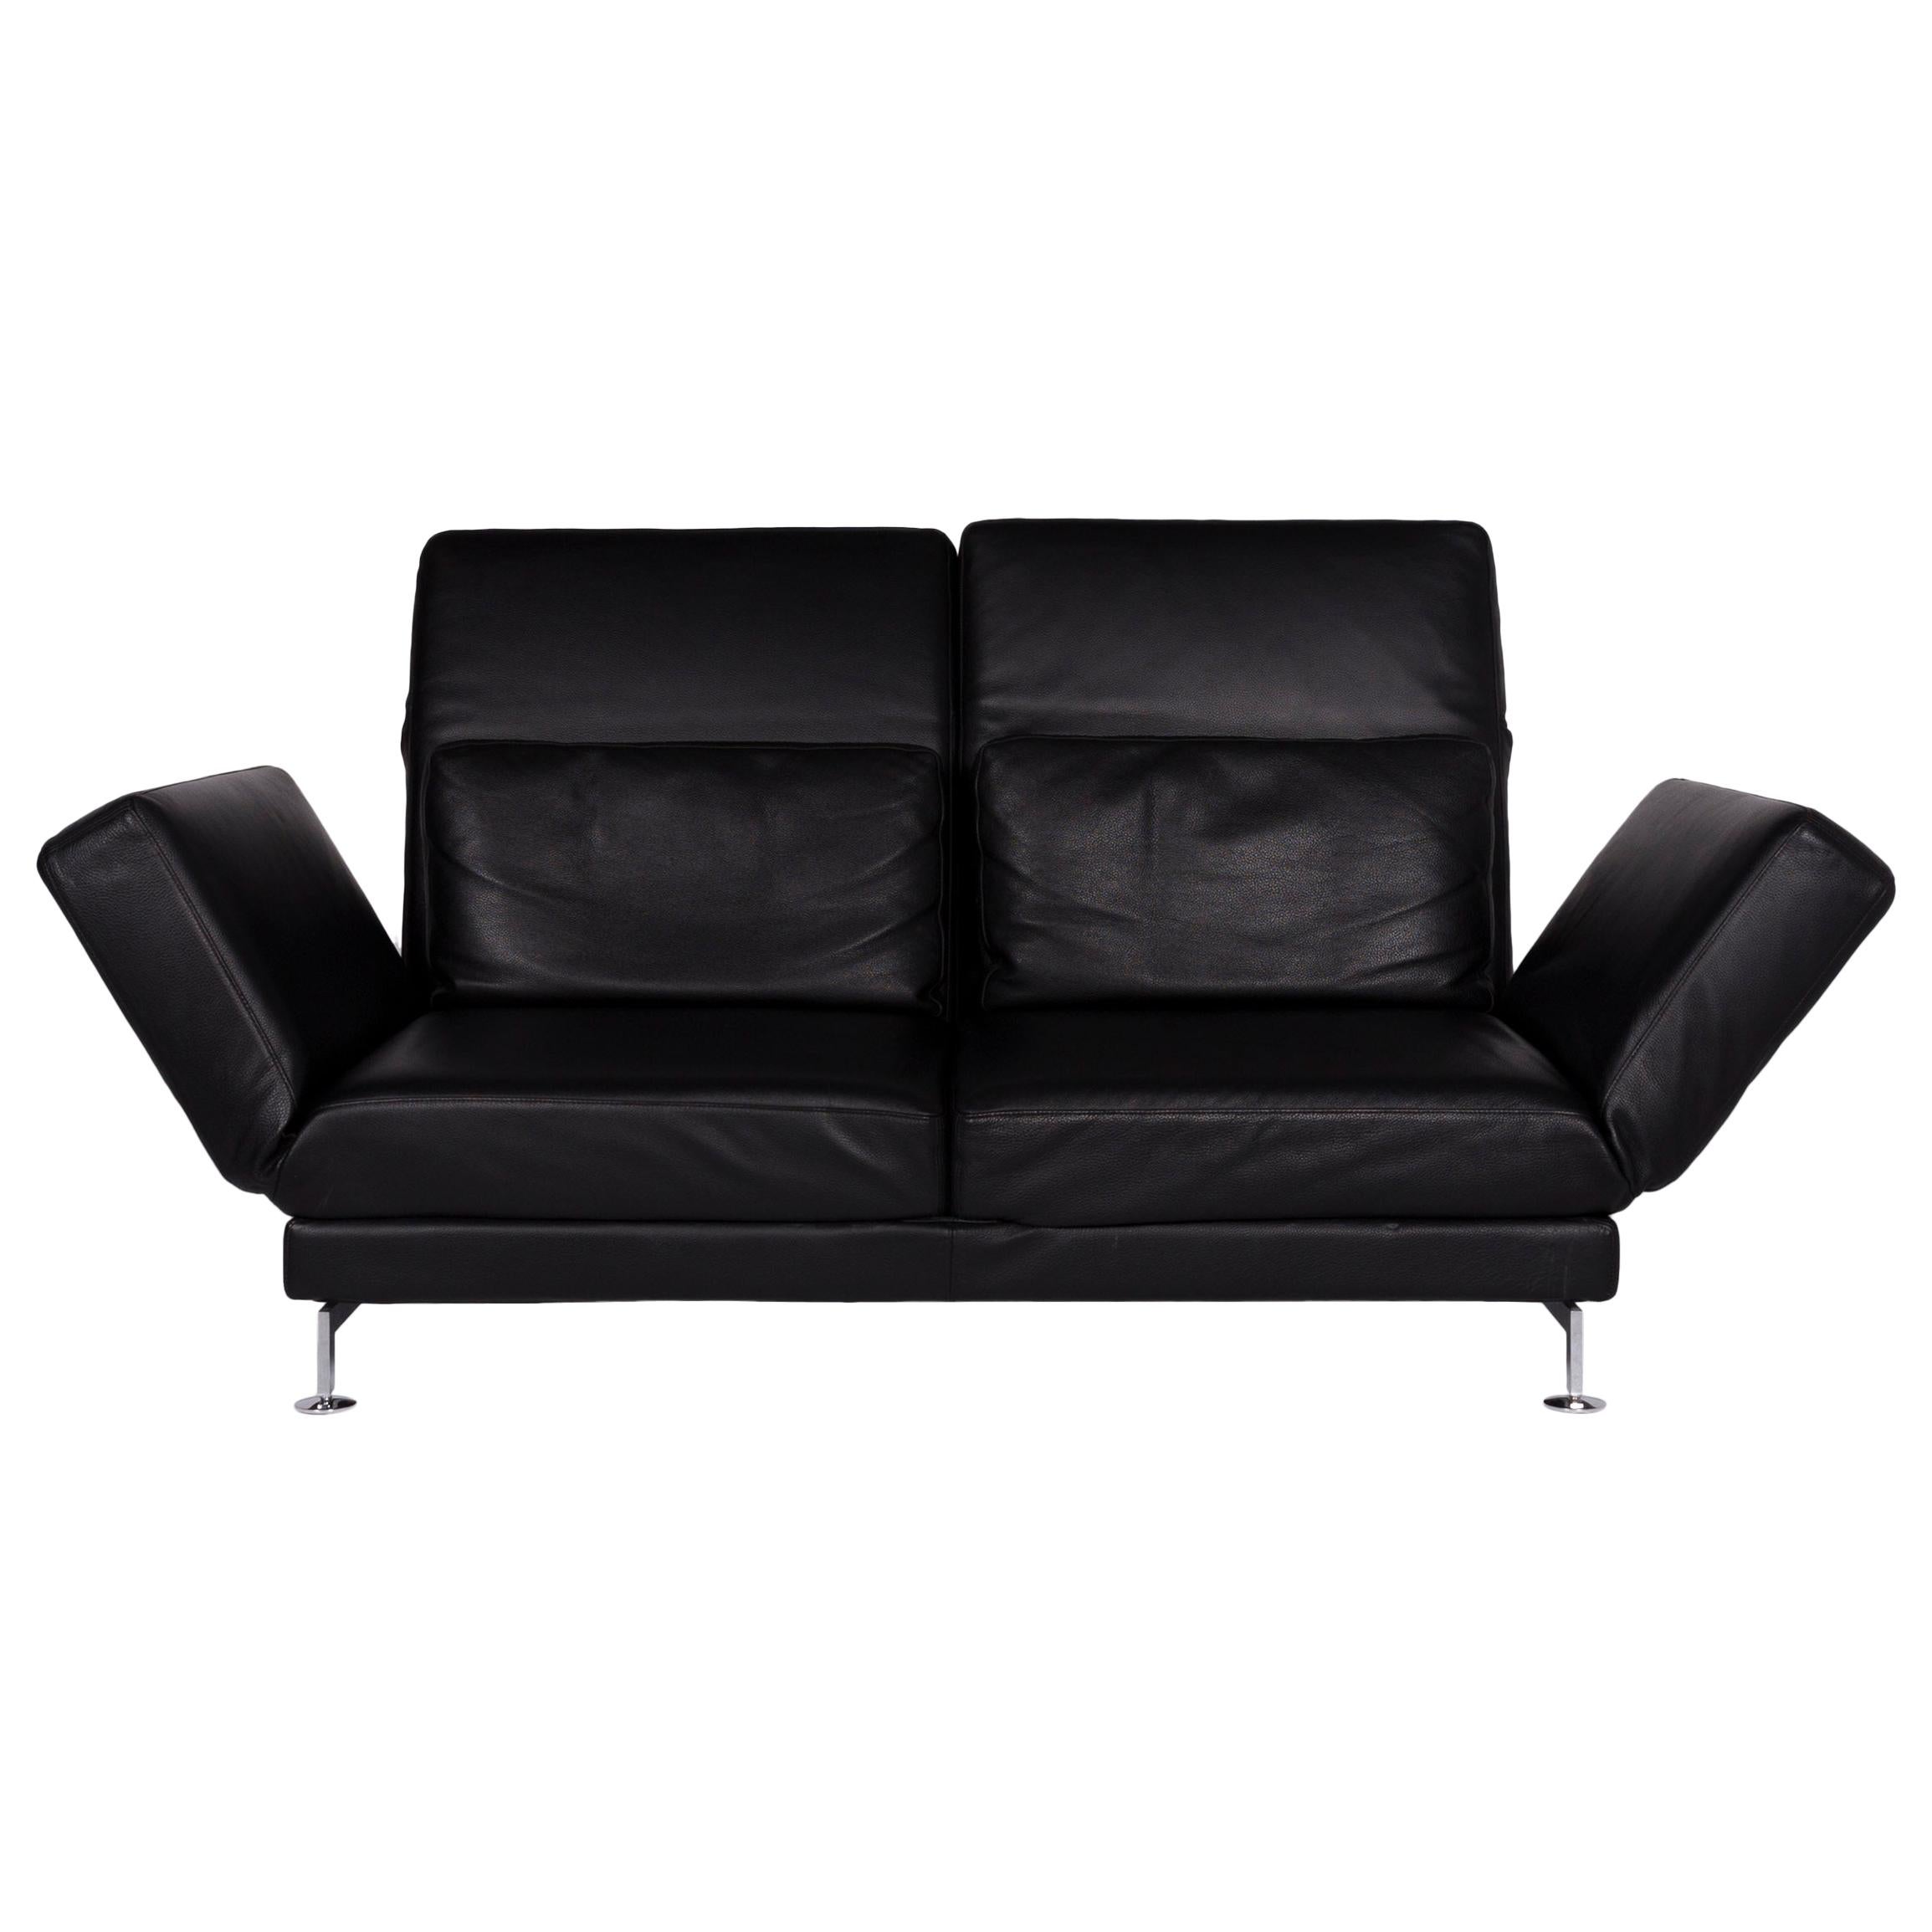 Brühl & Sippold Moule Leather Sofa Black Two-Seat Include Function For Sale